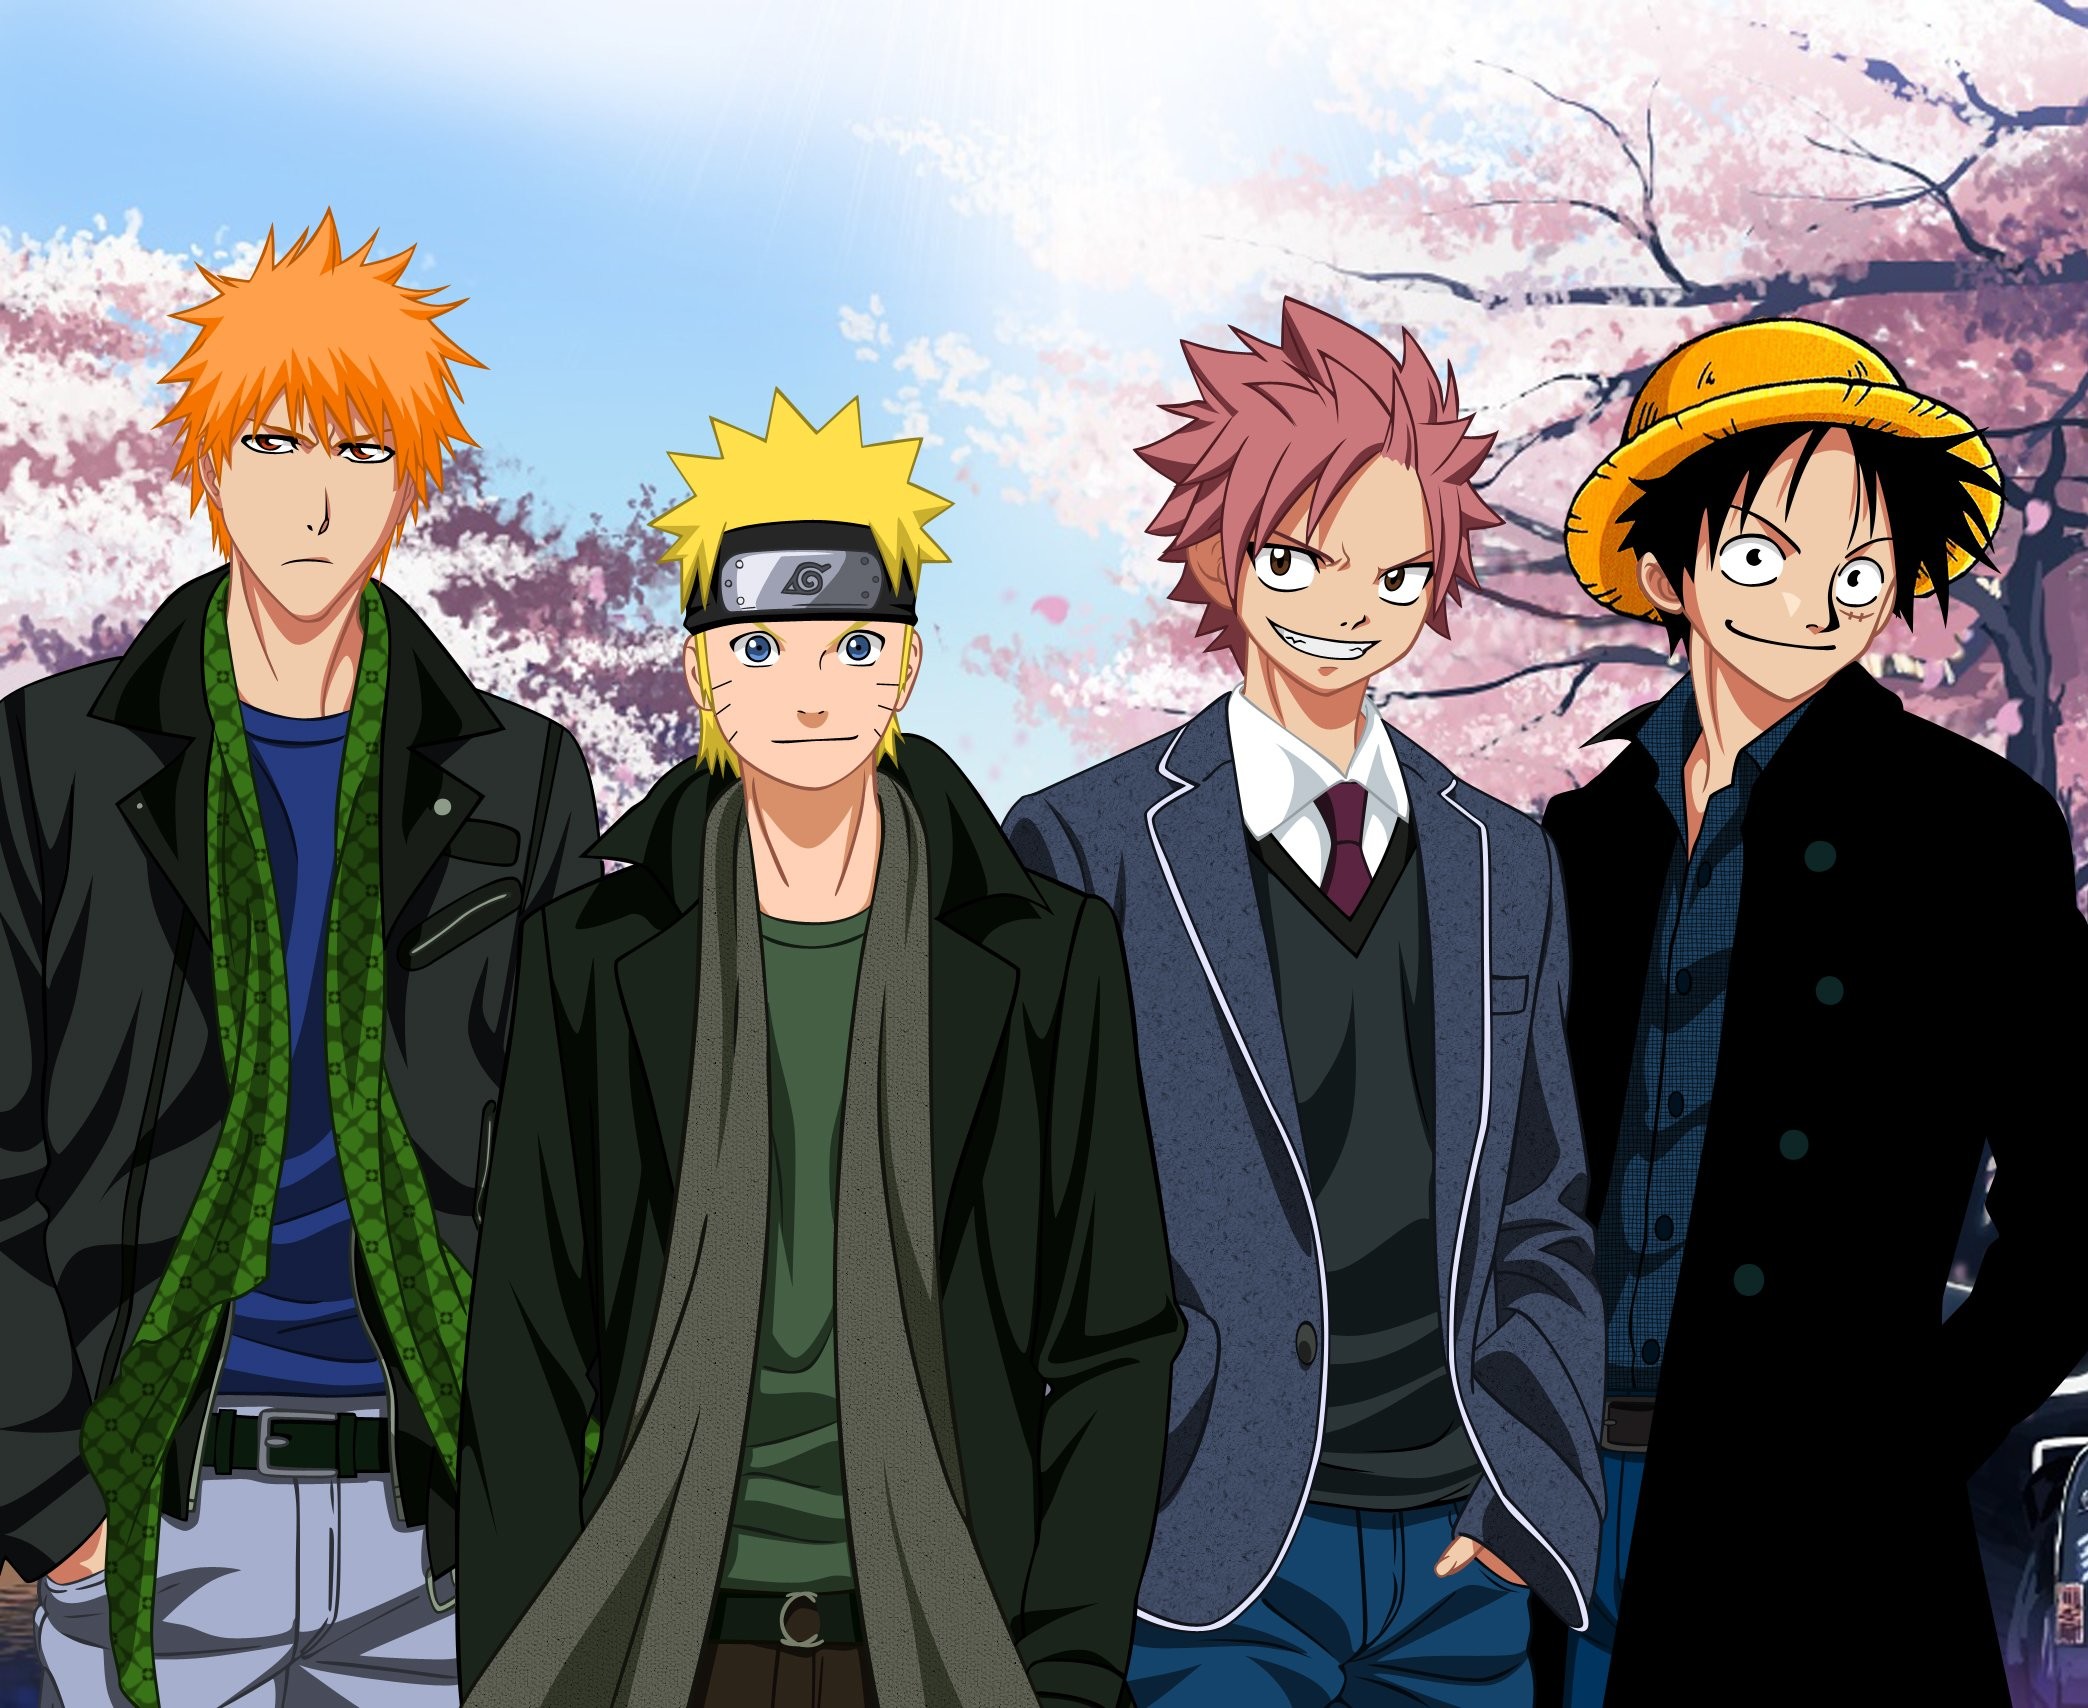 2088x1708 Anime series naruto bleach fairy tail one piece charcters boys wallpaper |   | 657627 | WallpaperUP